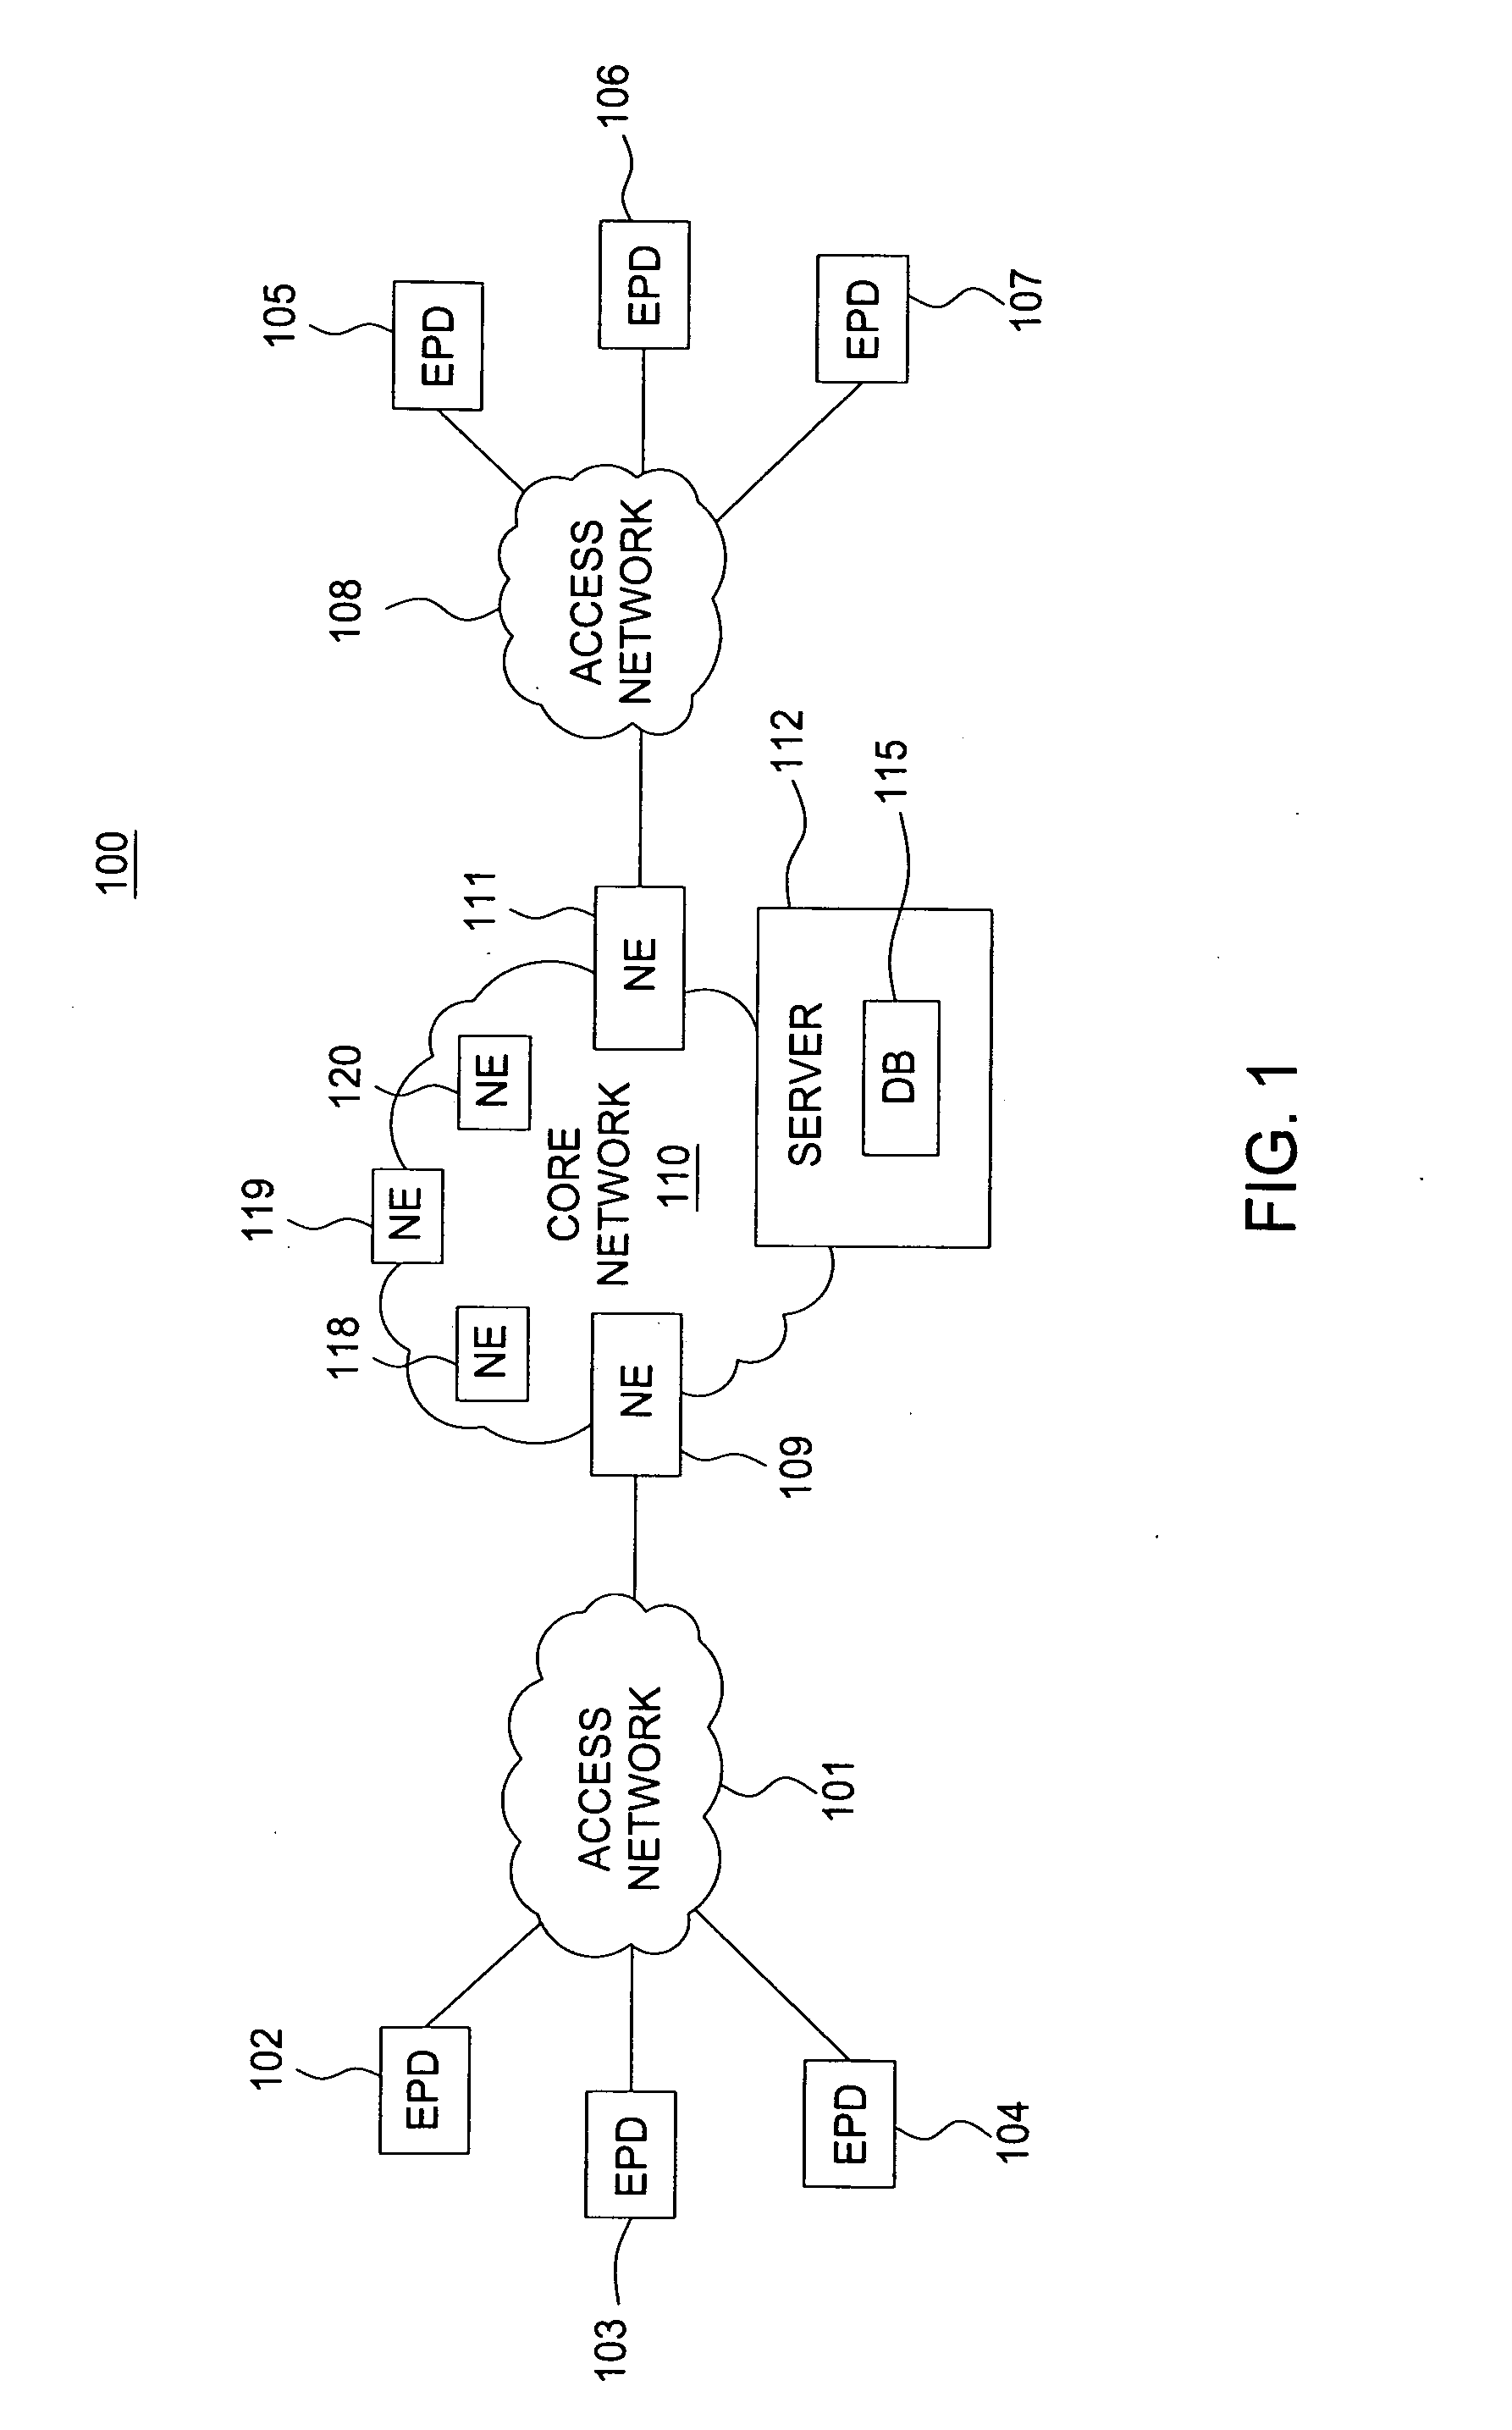 Method and apparatus for detecting compromised host computers